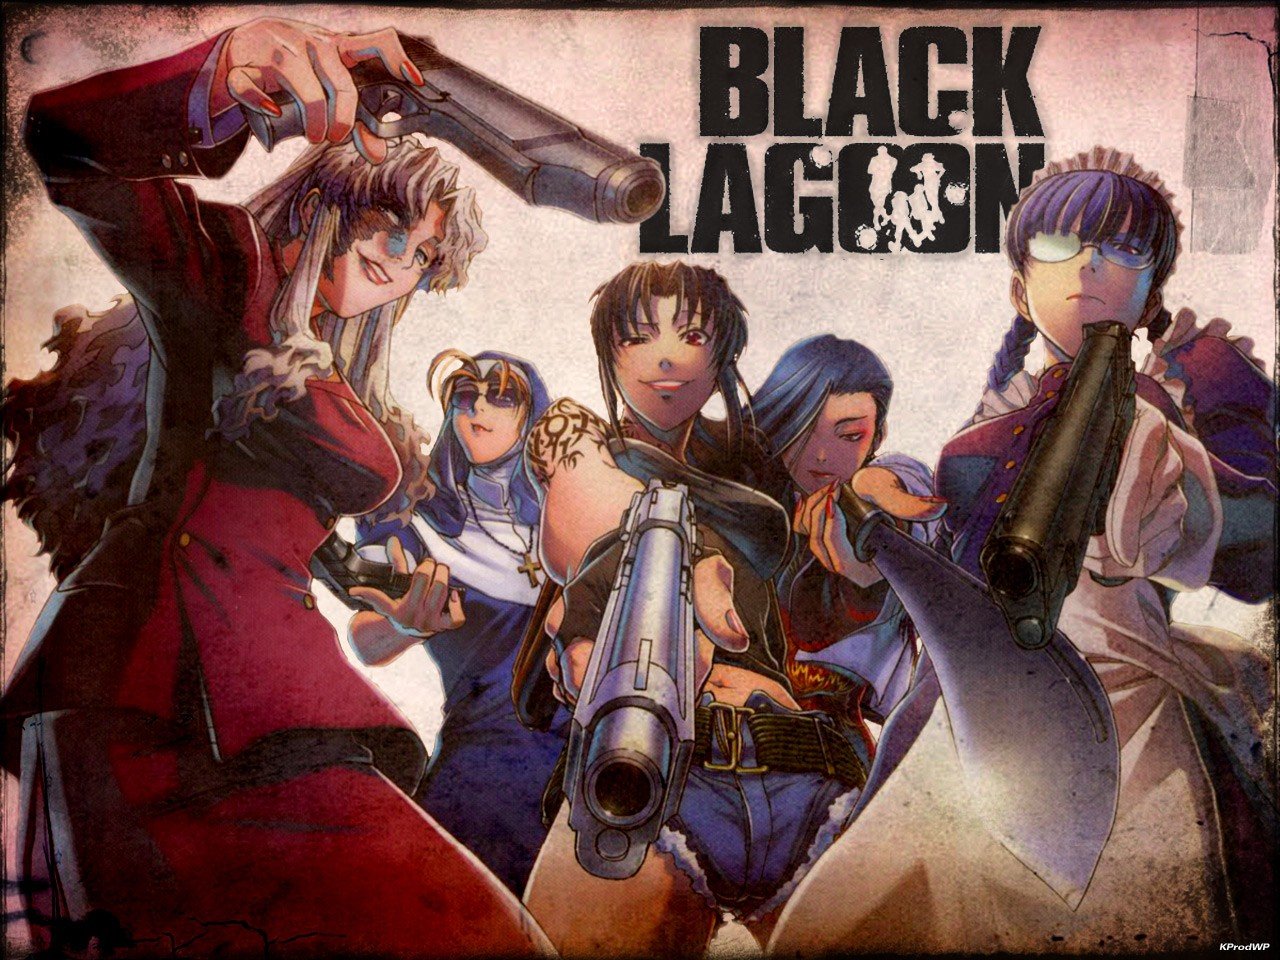 150+ Black Lagoon HD Wallpapers and Backgrounds